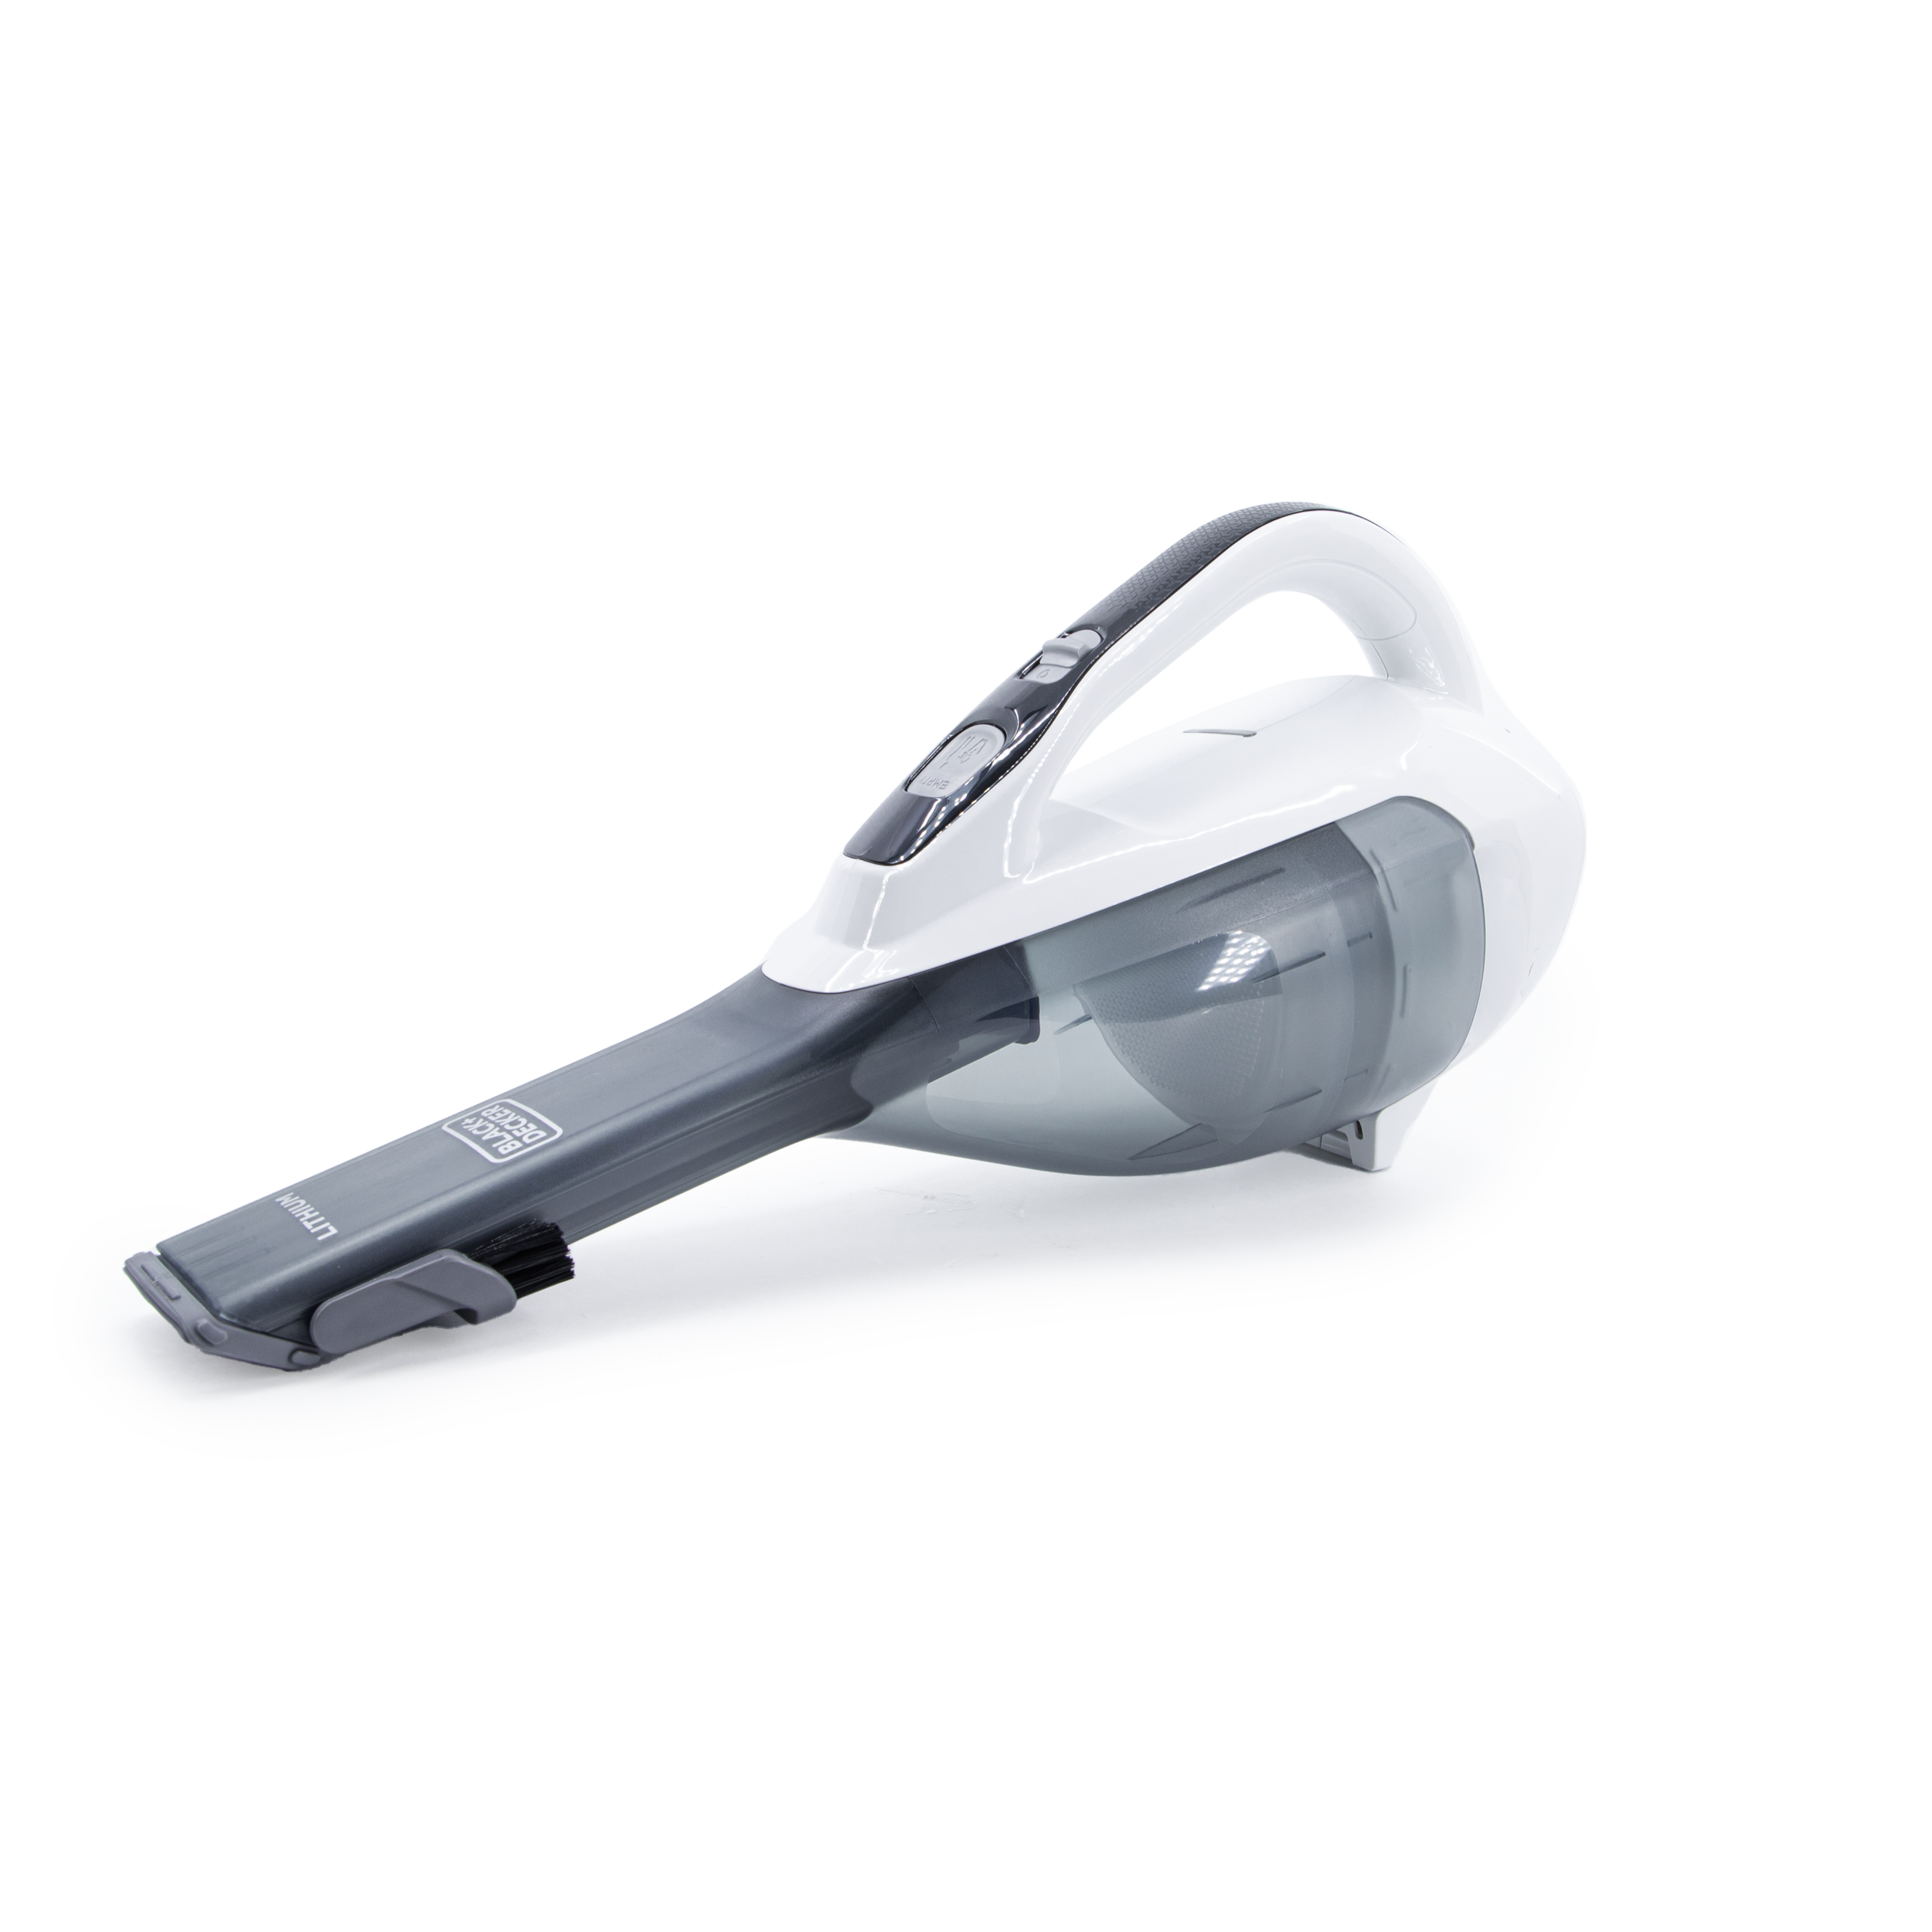 Best Buy: Black & Decker Dustbuster Wet/Dry Bagless Cordless Hand Vac  White/Teal CWV9608